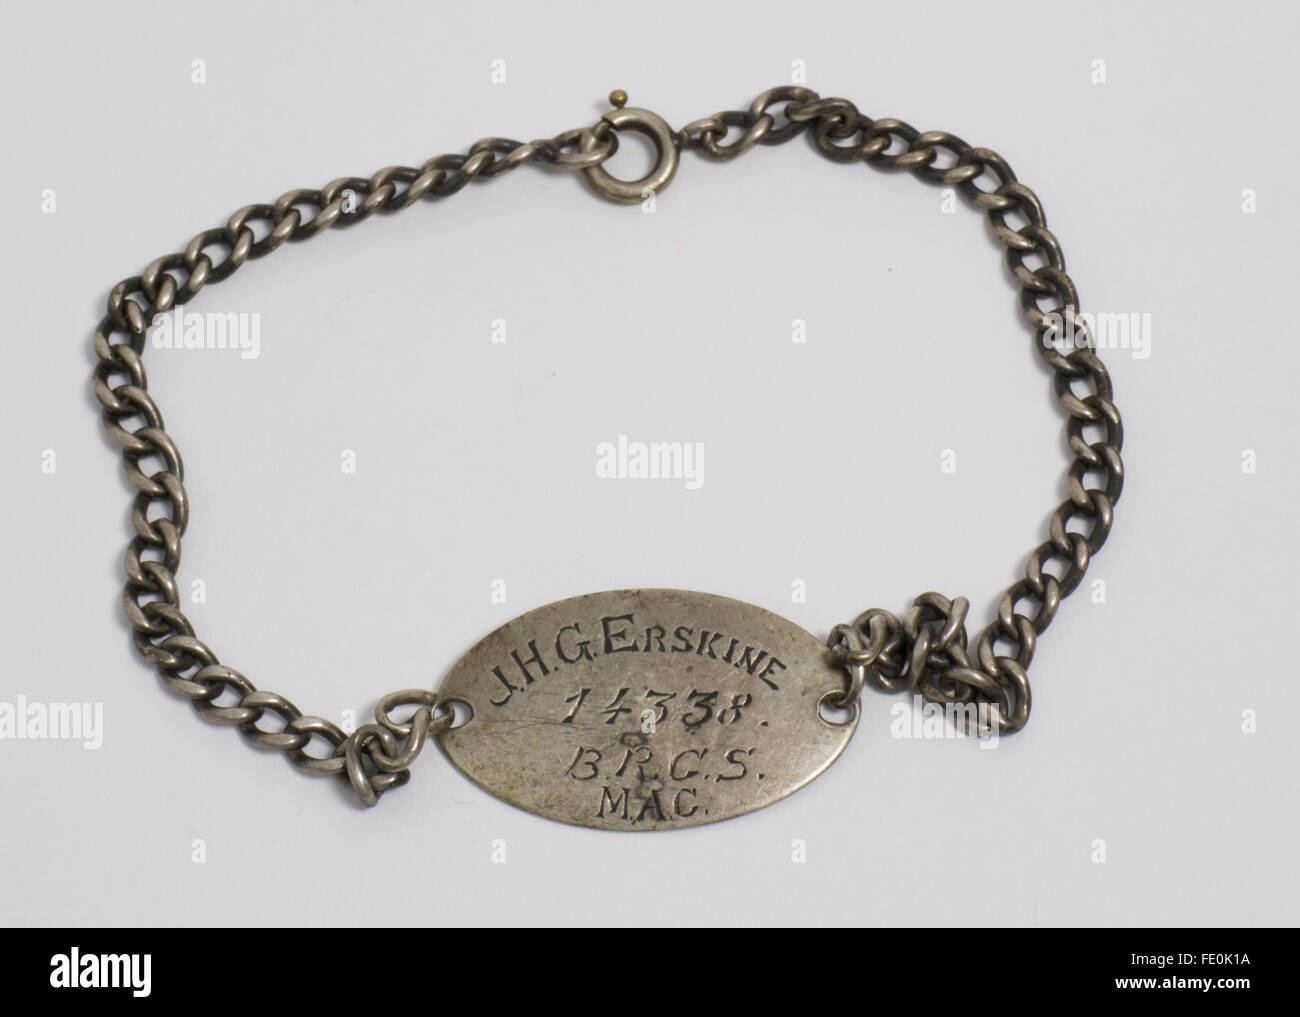 WW1 ID bracelet. The oval plaque is engraved “J.H.G. Erskine 14338 B.R.G.S.MAC”, the reverse with “Etaples'. The bracelet shows Stock Photo